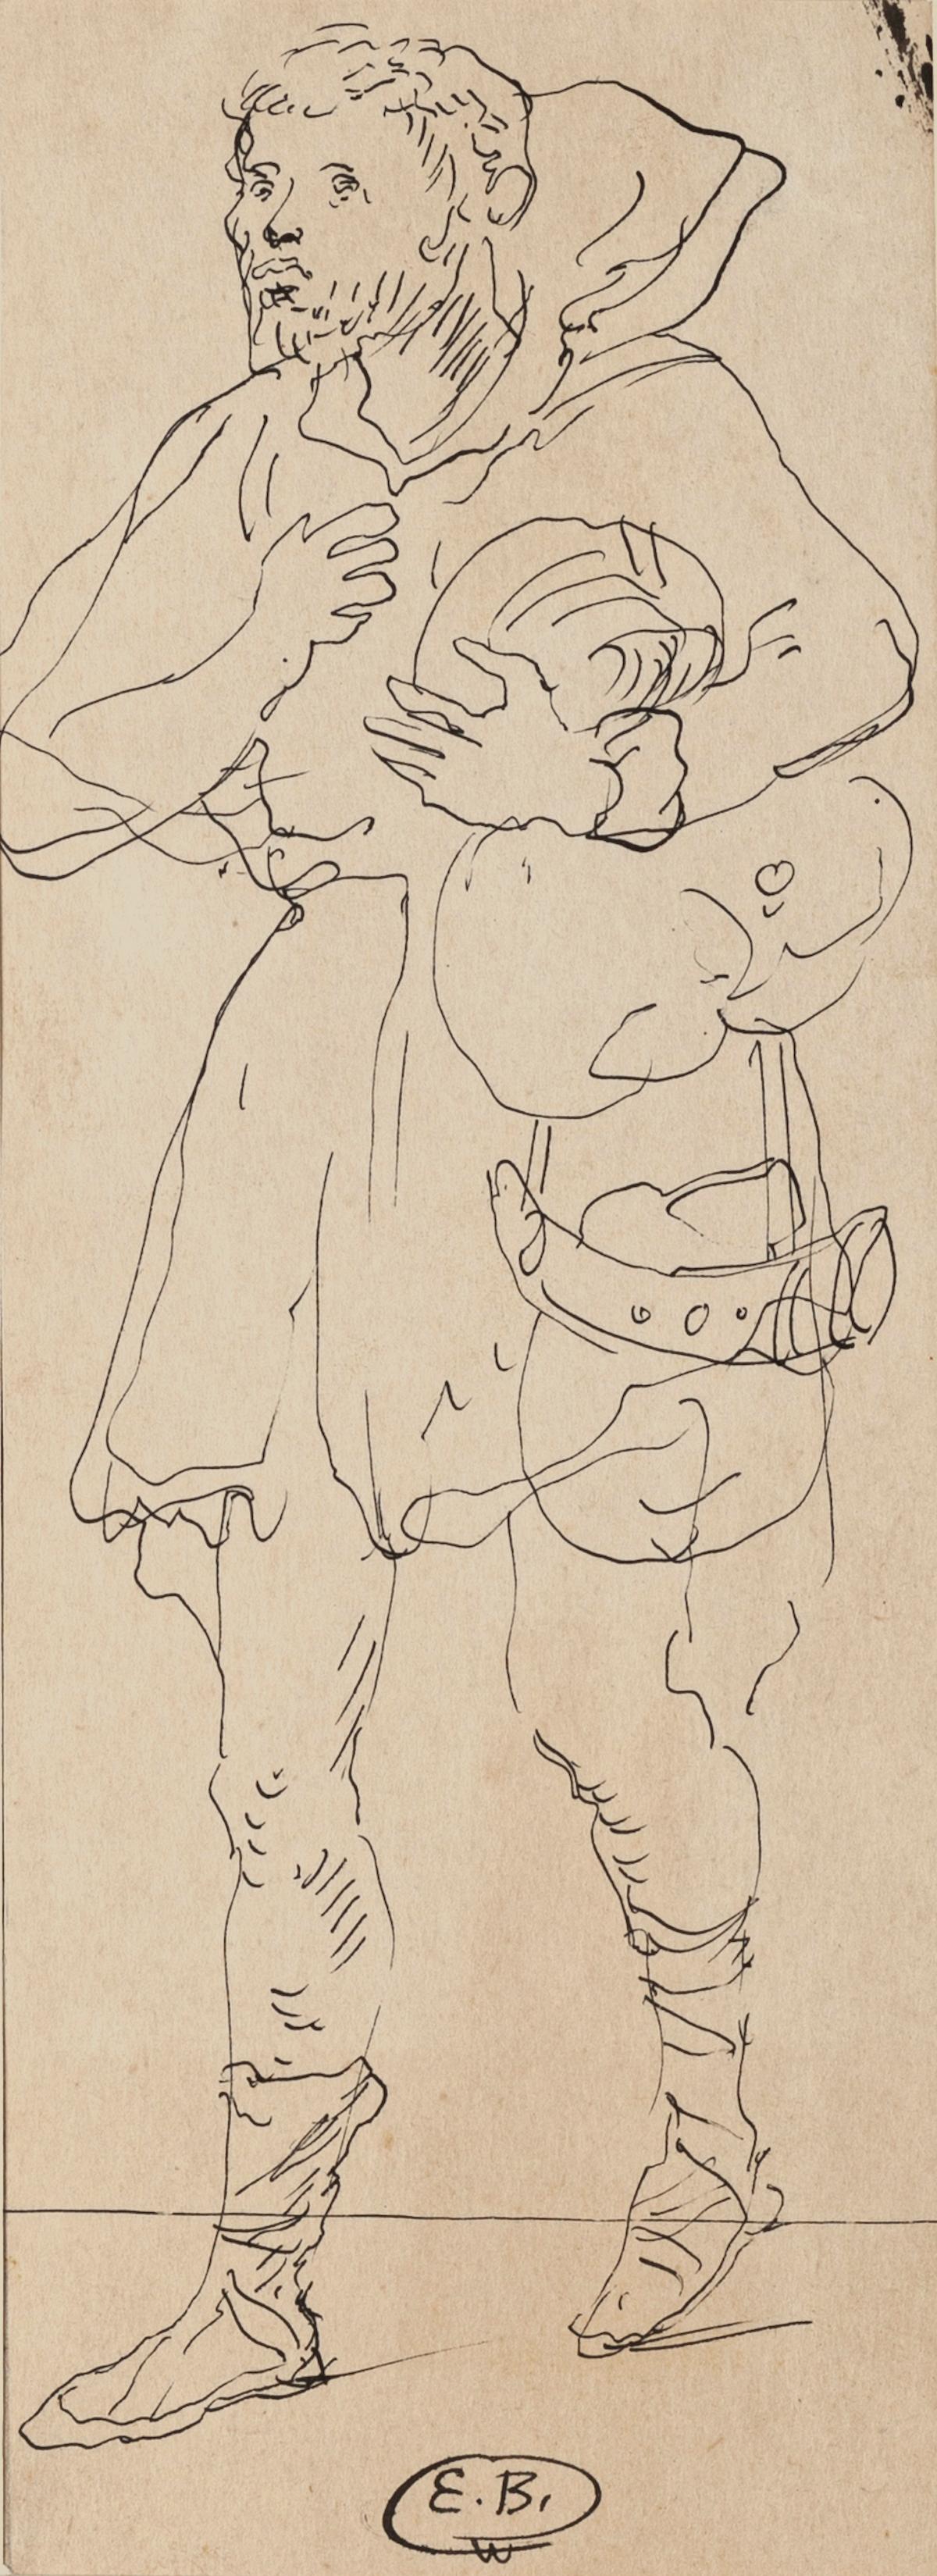 Theatrical Costume - Pencil Drawing by Eugène Berman - 1950s